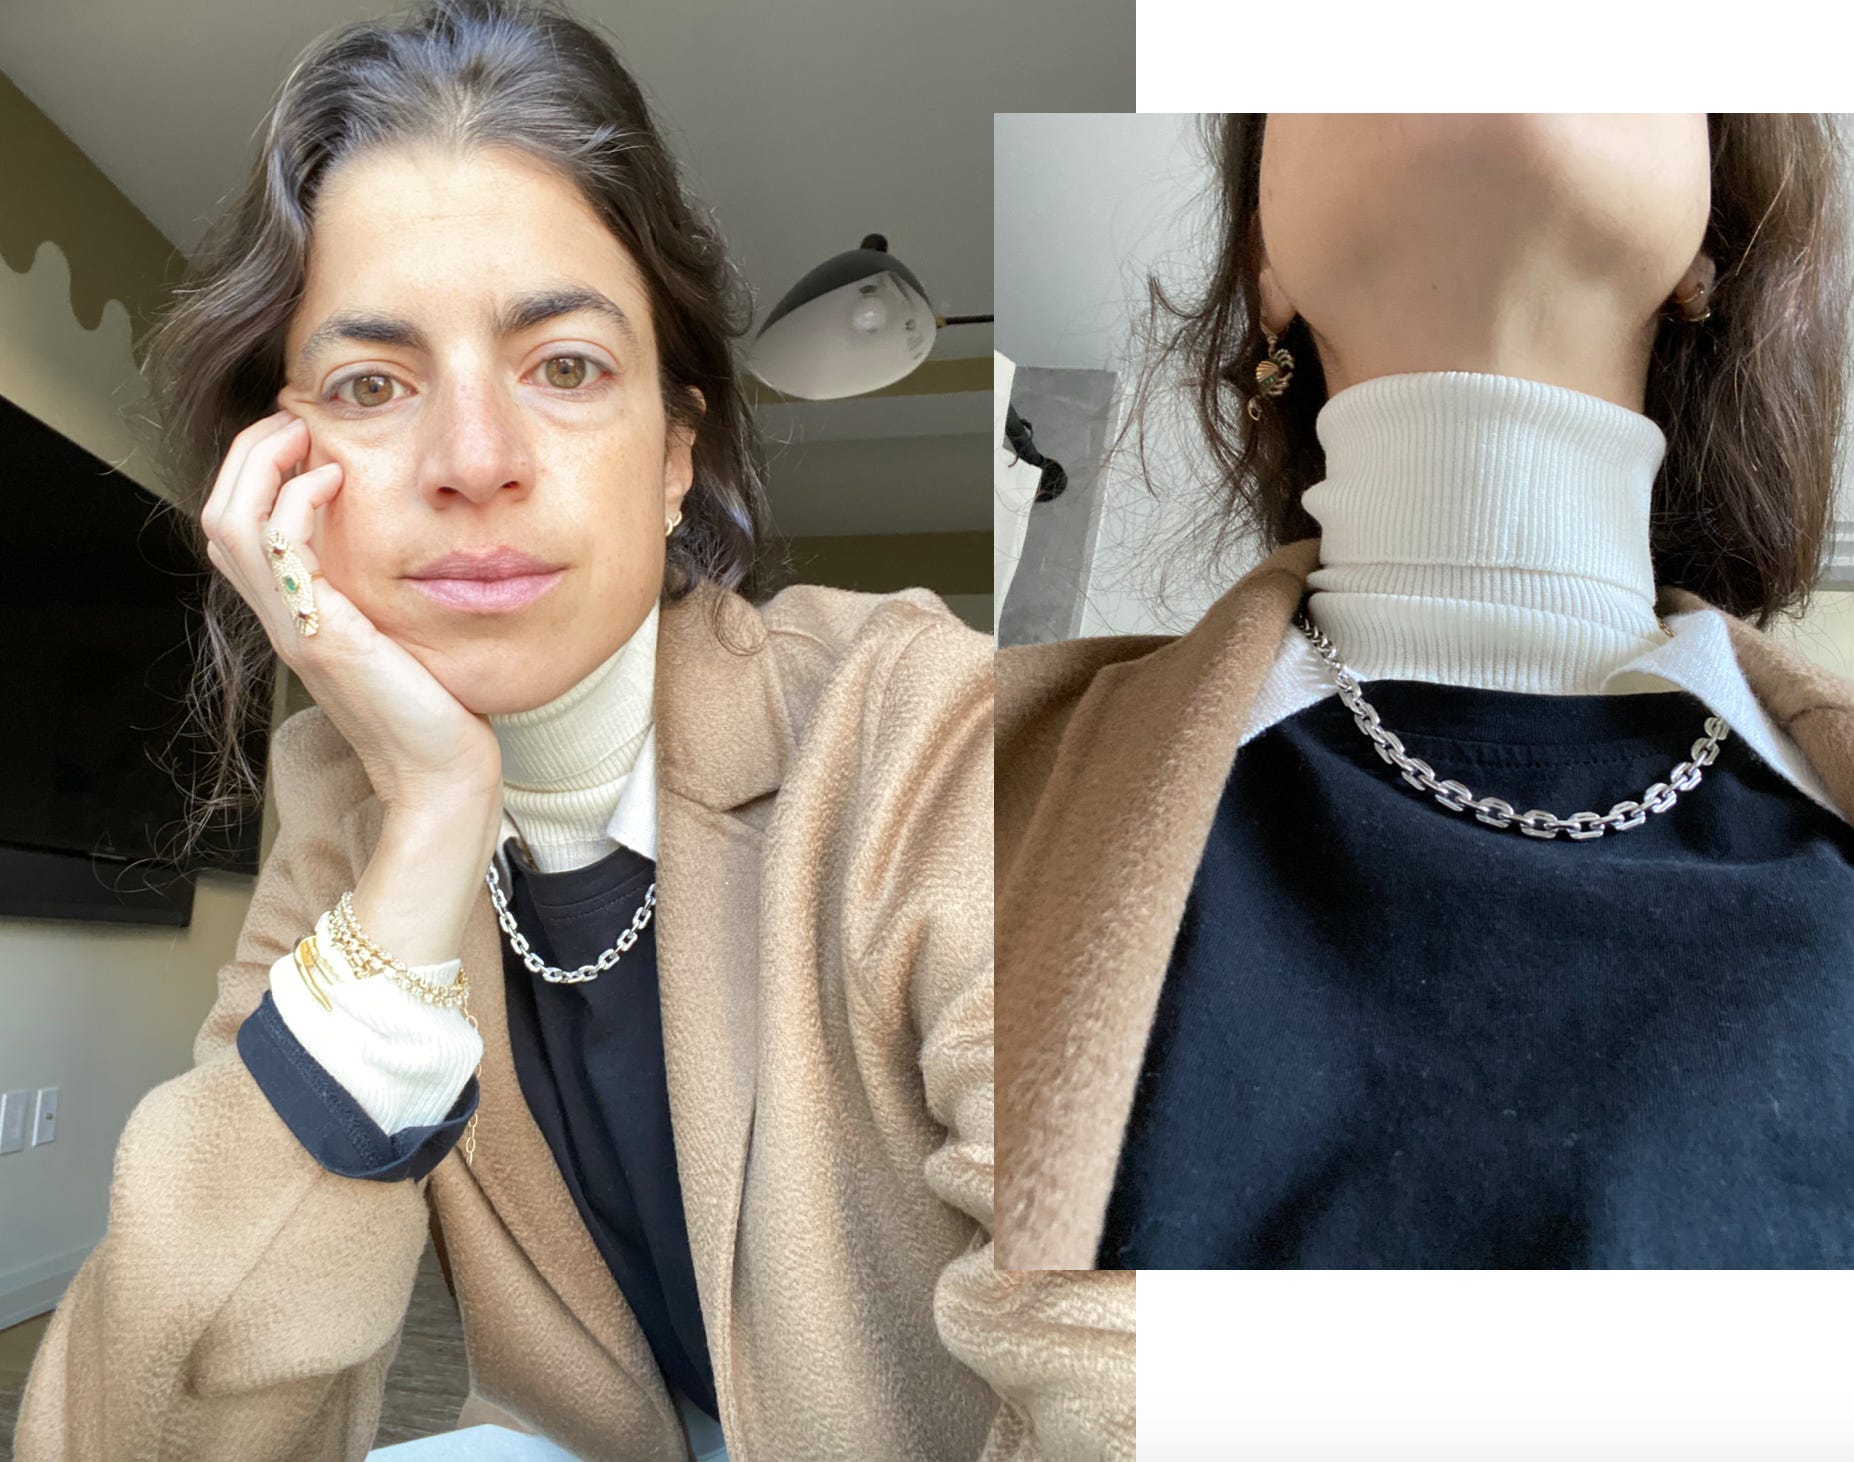 What Necklace Should You Pair With A Turtleneck? – Blingvine